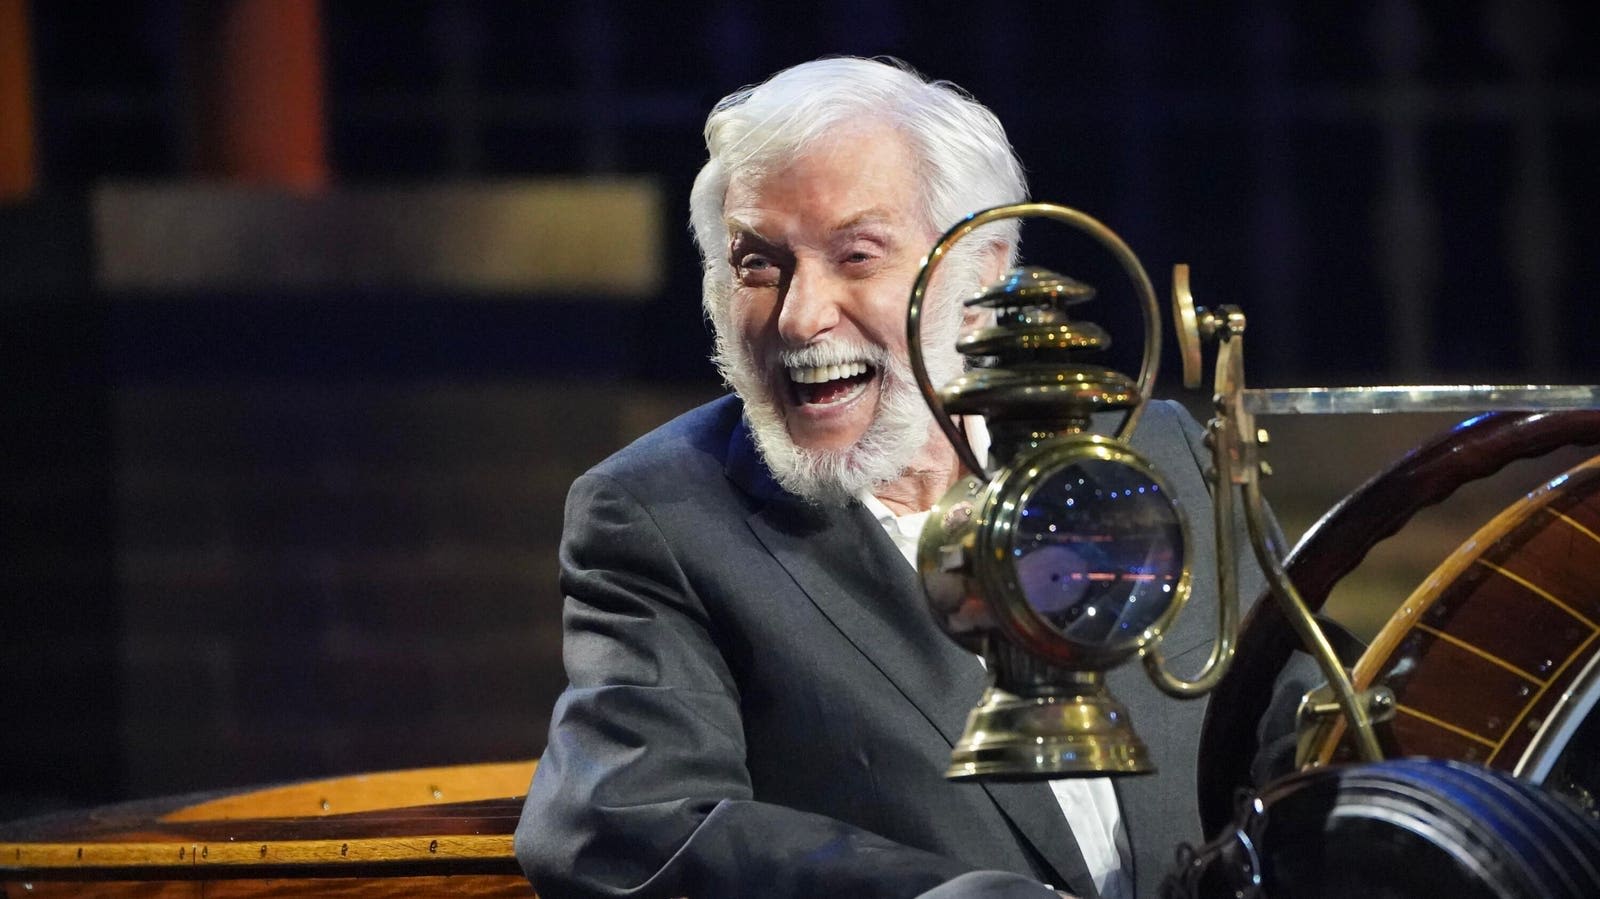 Dick Van Dyke Reflects On His Beloved Career: ‘I Am So Happy That I Picked The Work I Did’